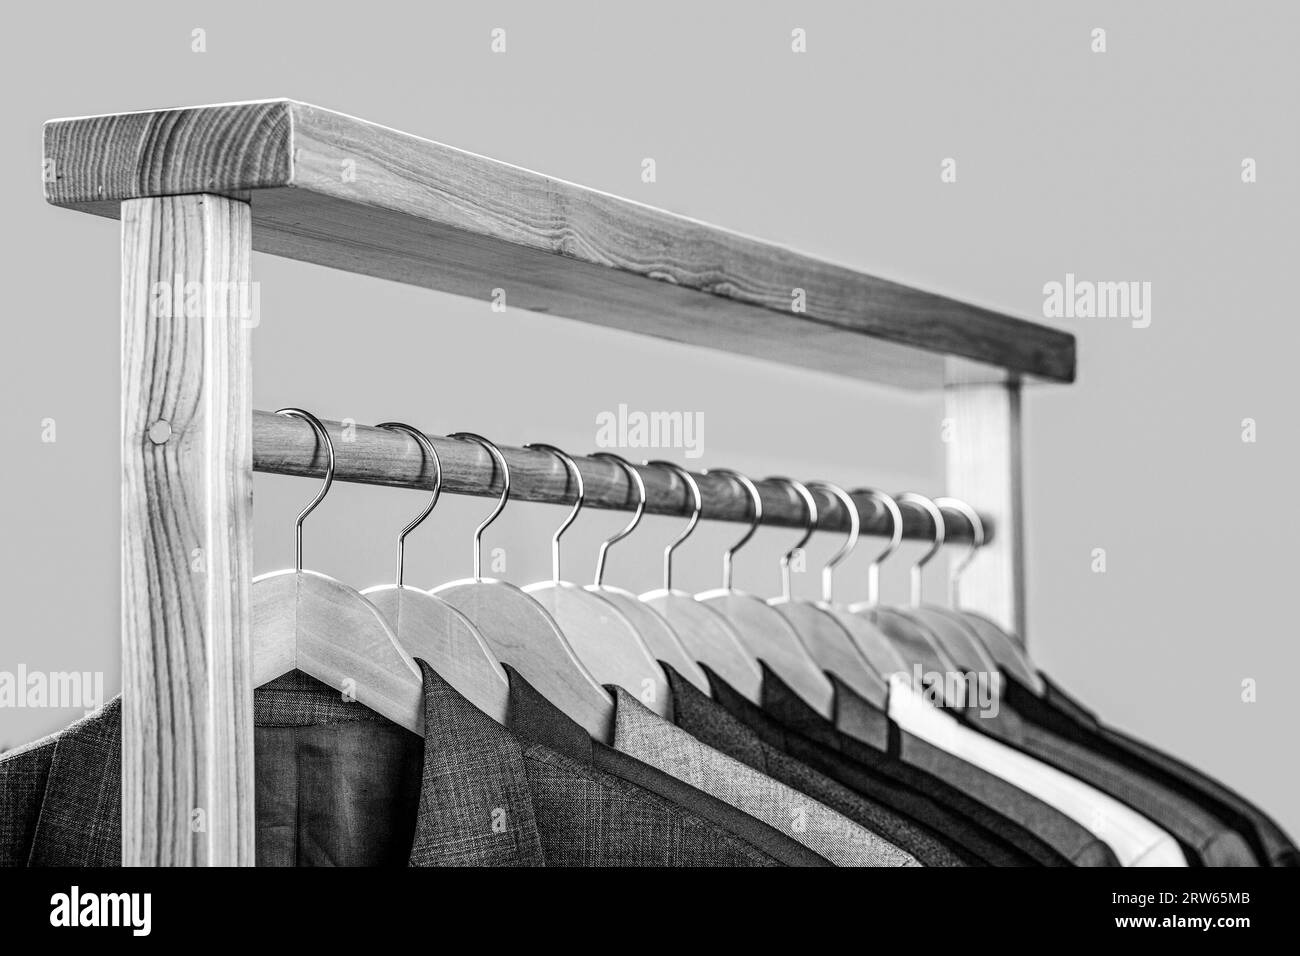 Suits for men hanging on the rack. Mens suits in different colors hanging on hanger in a retail clothes store, close-up. Black and white Stock Photo